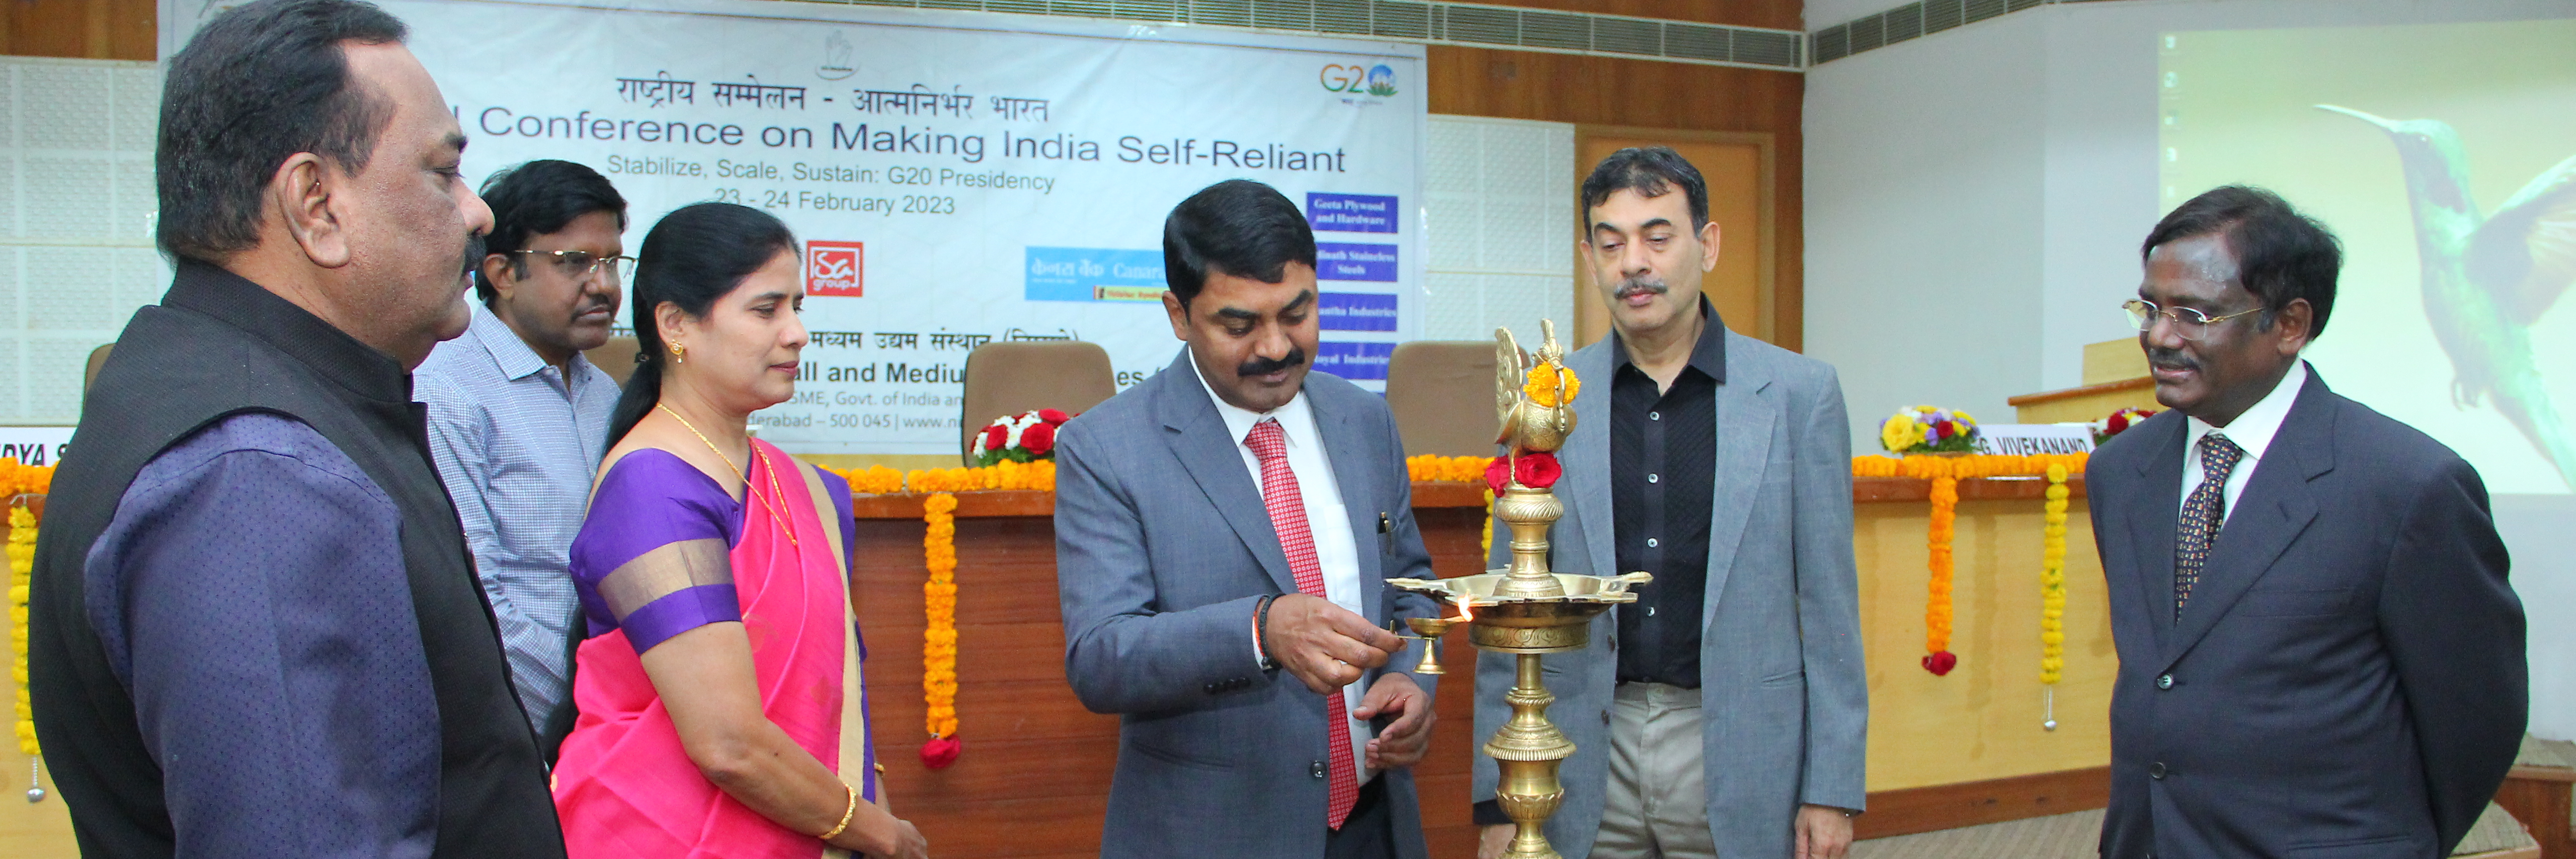 National Conference on Making India Self-Reliant